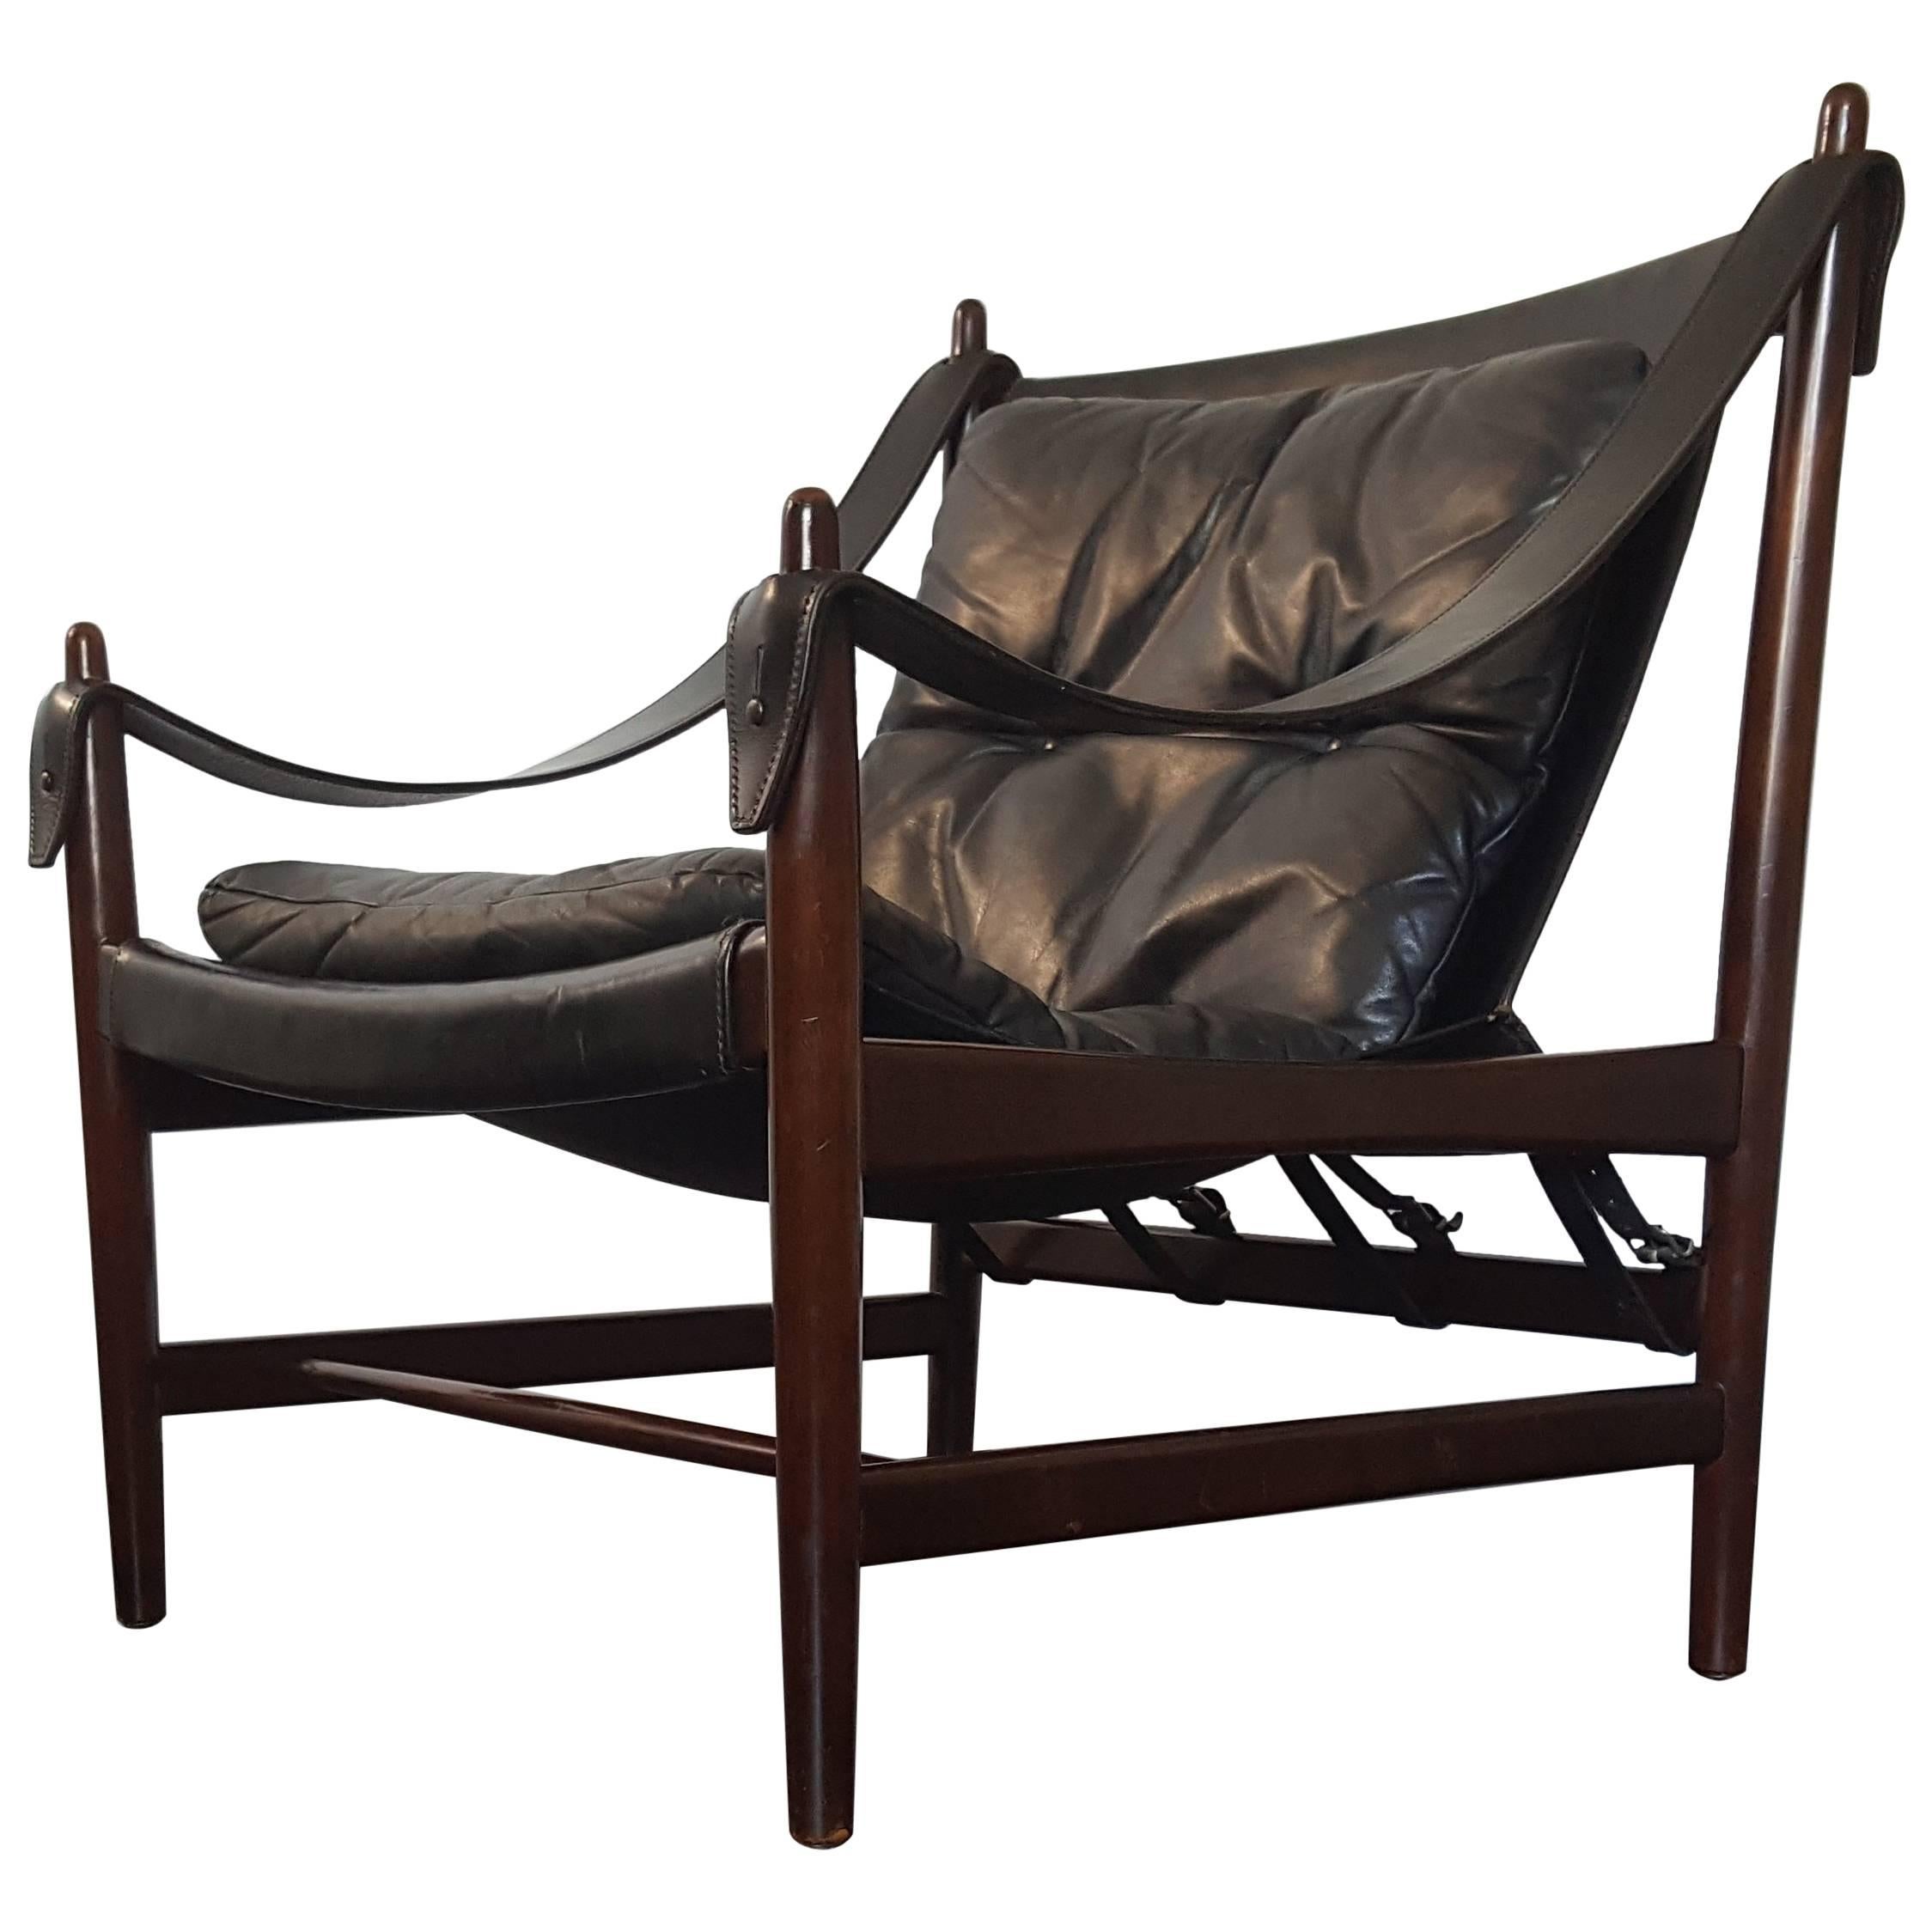 1960s Danish Produced Safari Chair in Leather and Mahogany